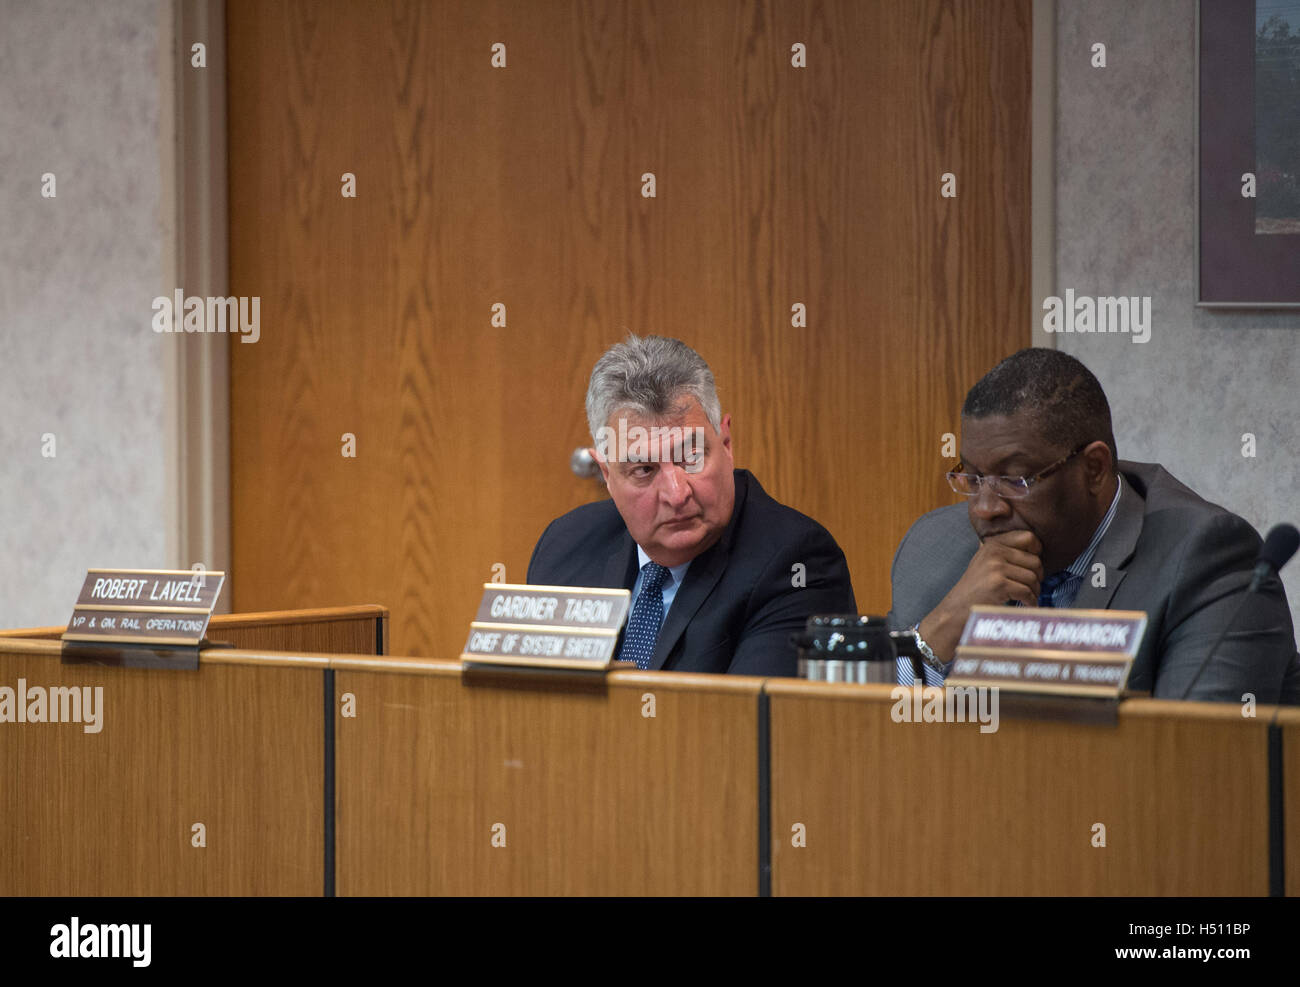 Newark, NJ, USA. 13th Oct, 2016. Board member ROBERT LAVELL, left at the New Jersey Transit Board Meeting, Thursday, October 13, 2016 in Newark. © Bryan Smith/ZUMA Wire/Alamy Live News Stock Photo